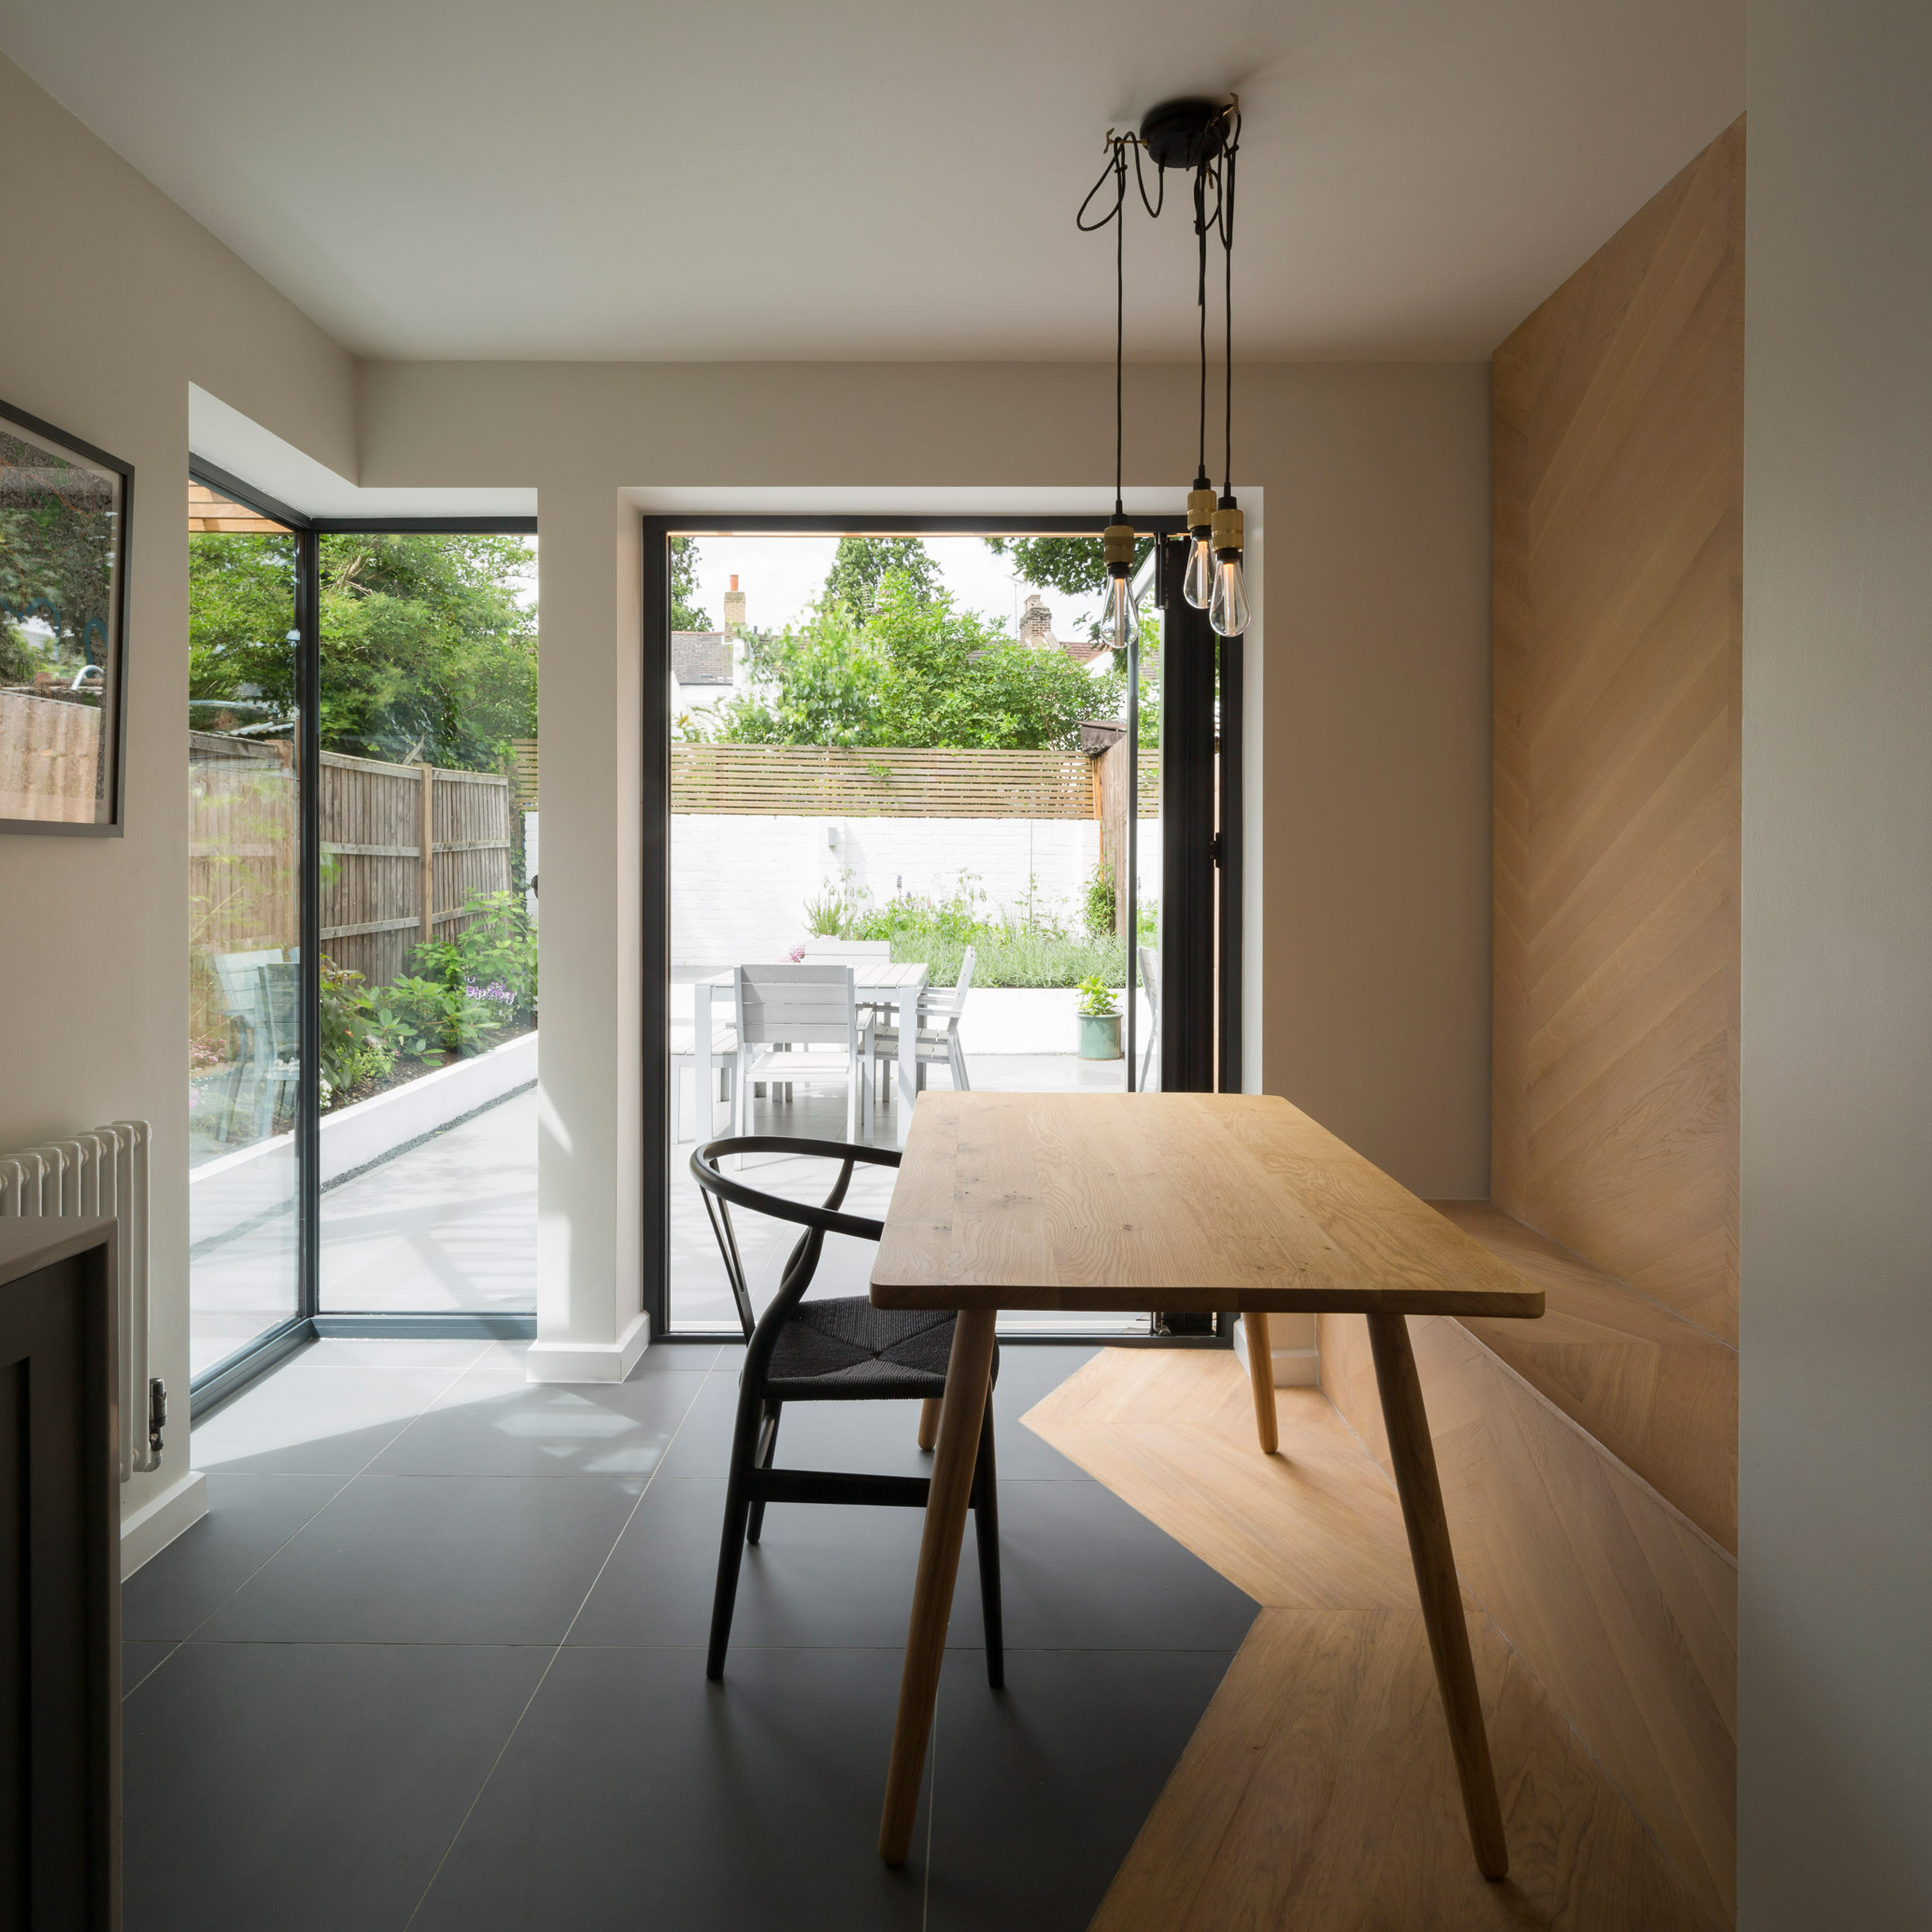 wearside-wood-gruff-limited-dont-move-improve-architecture-residential-extensions_dezeen_sq